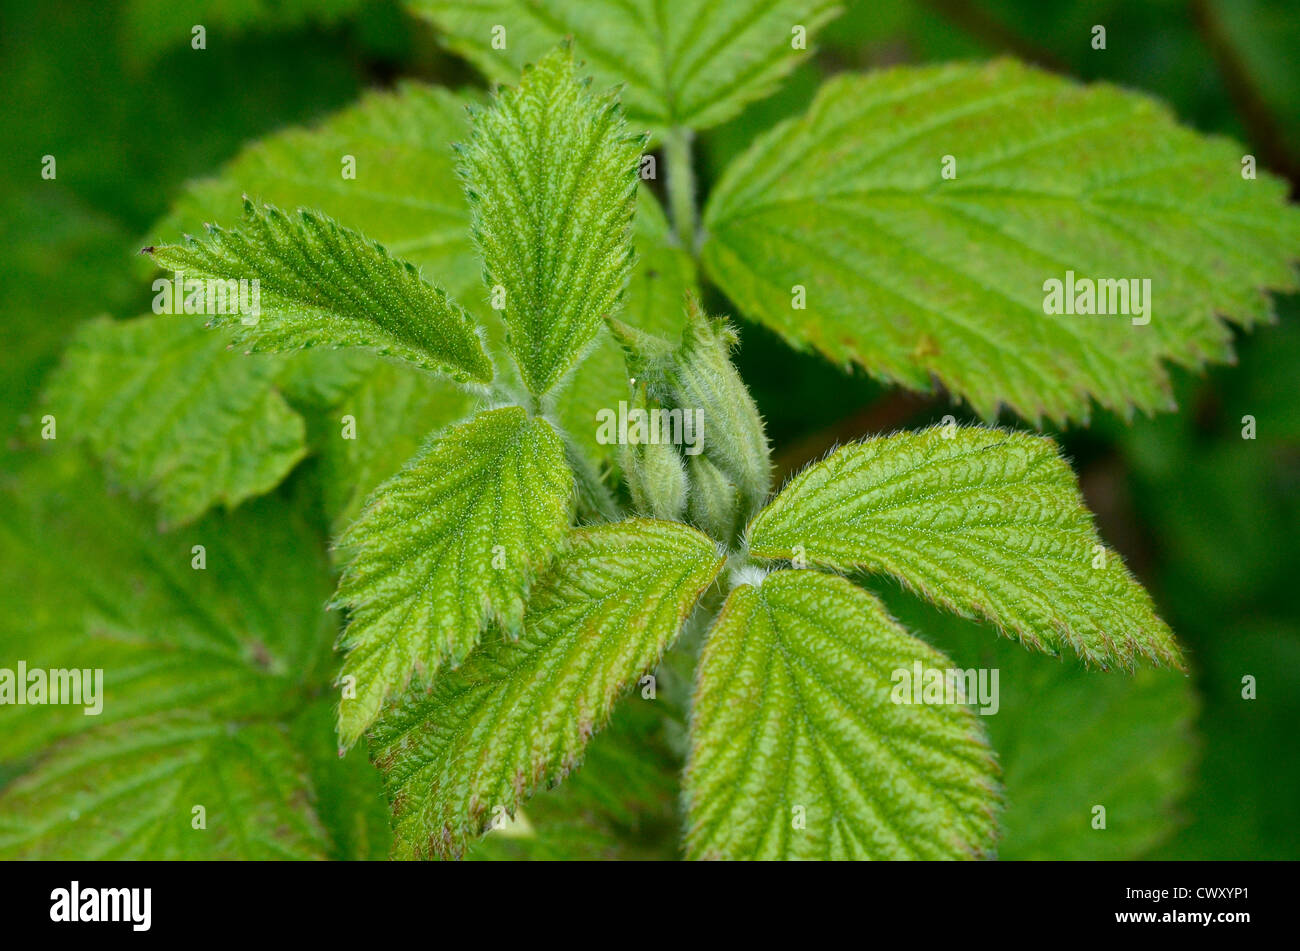 Leaves / foliage of Bramble / Rubus fruticosus agg. Medicinal plant once used for herbal remedies, while familiar Blackberry fruits used as food. Stock Photo